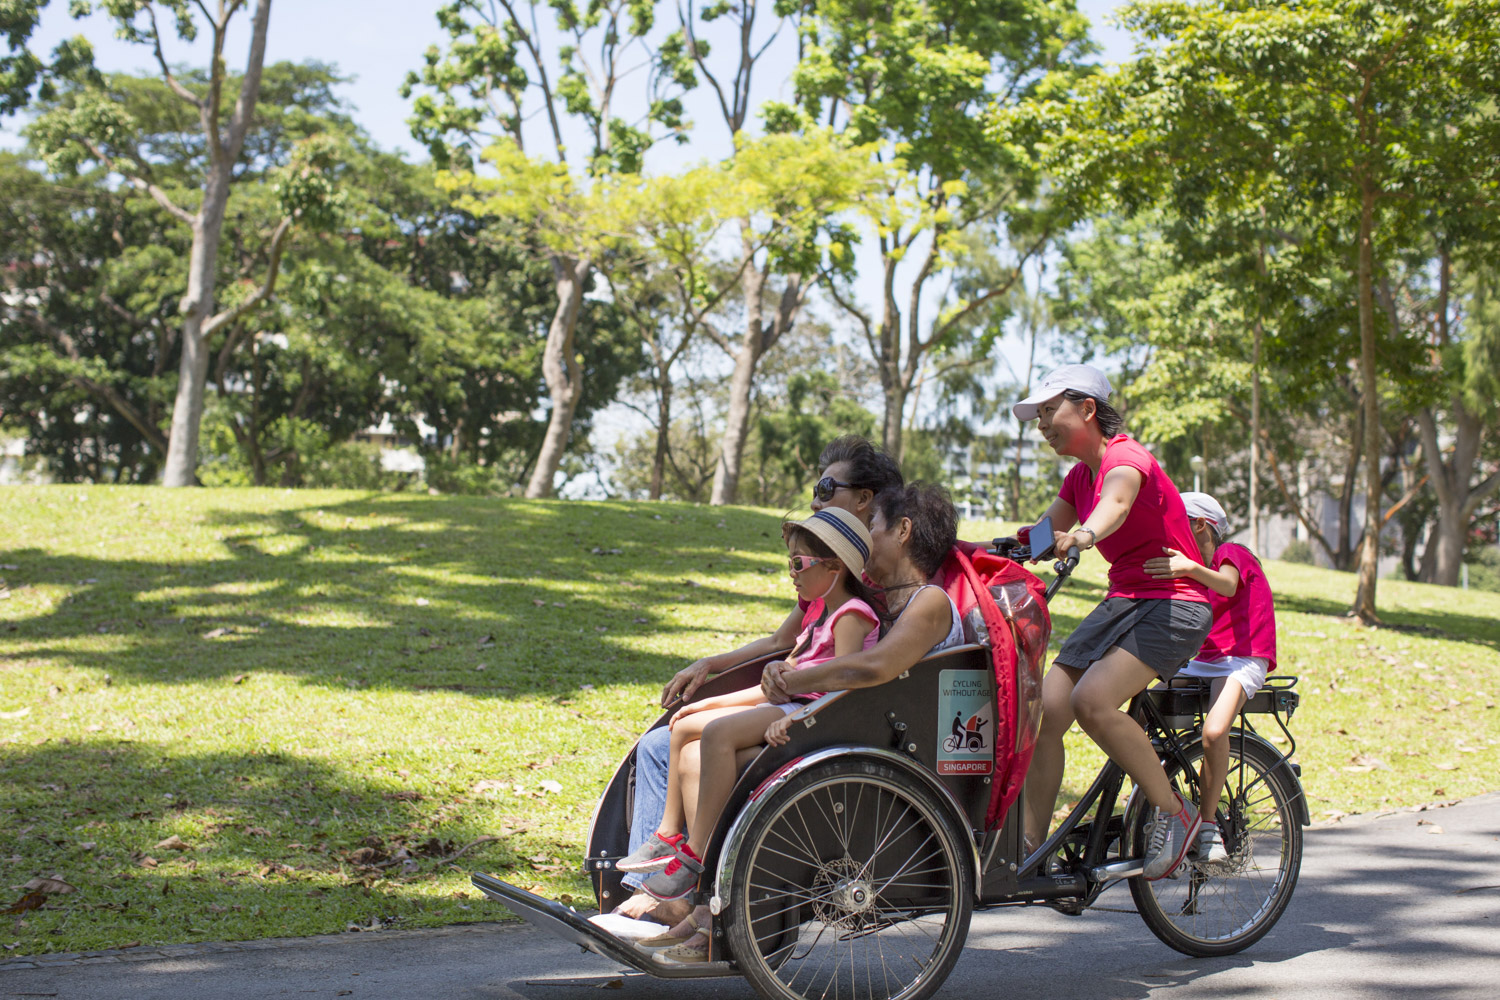 With everyone packed in the trishaw, Dorothy leads the way around the park as everyone enjoyed the cool breeze.